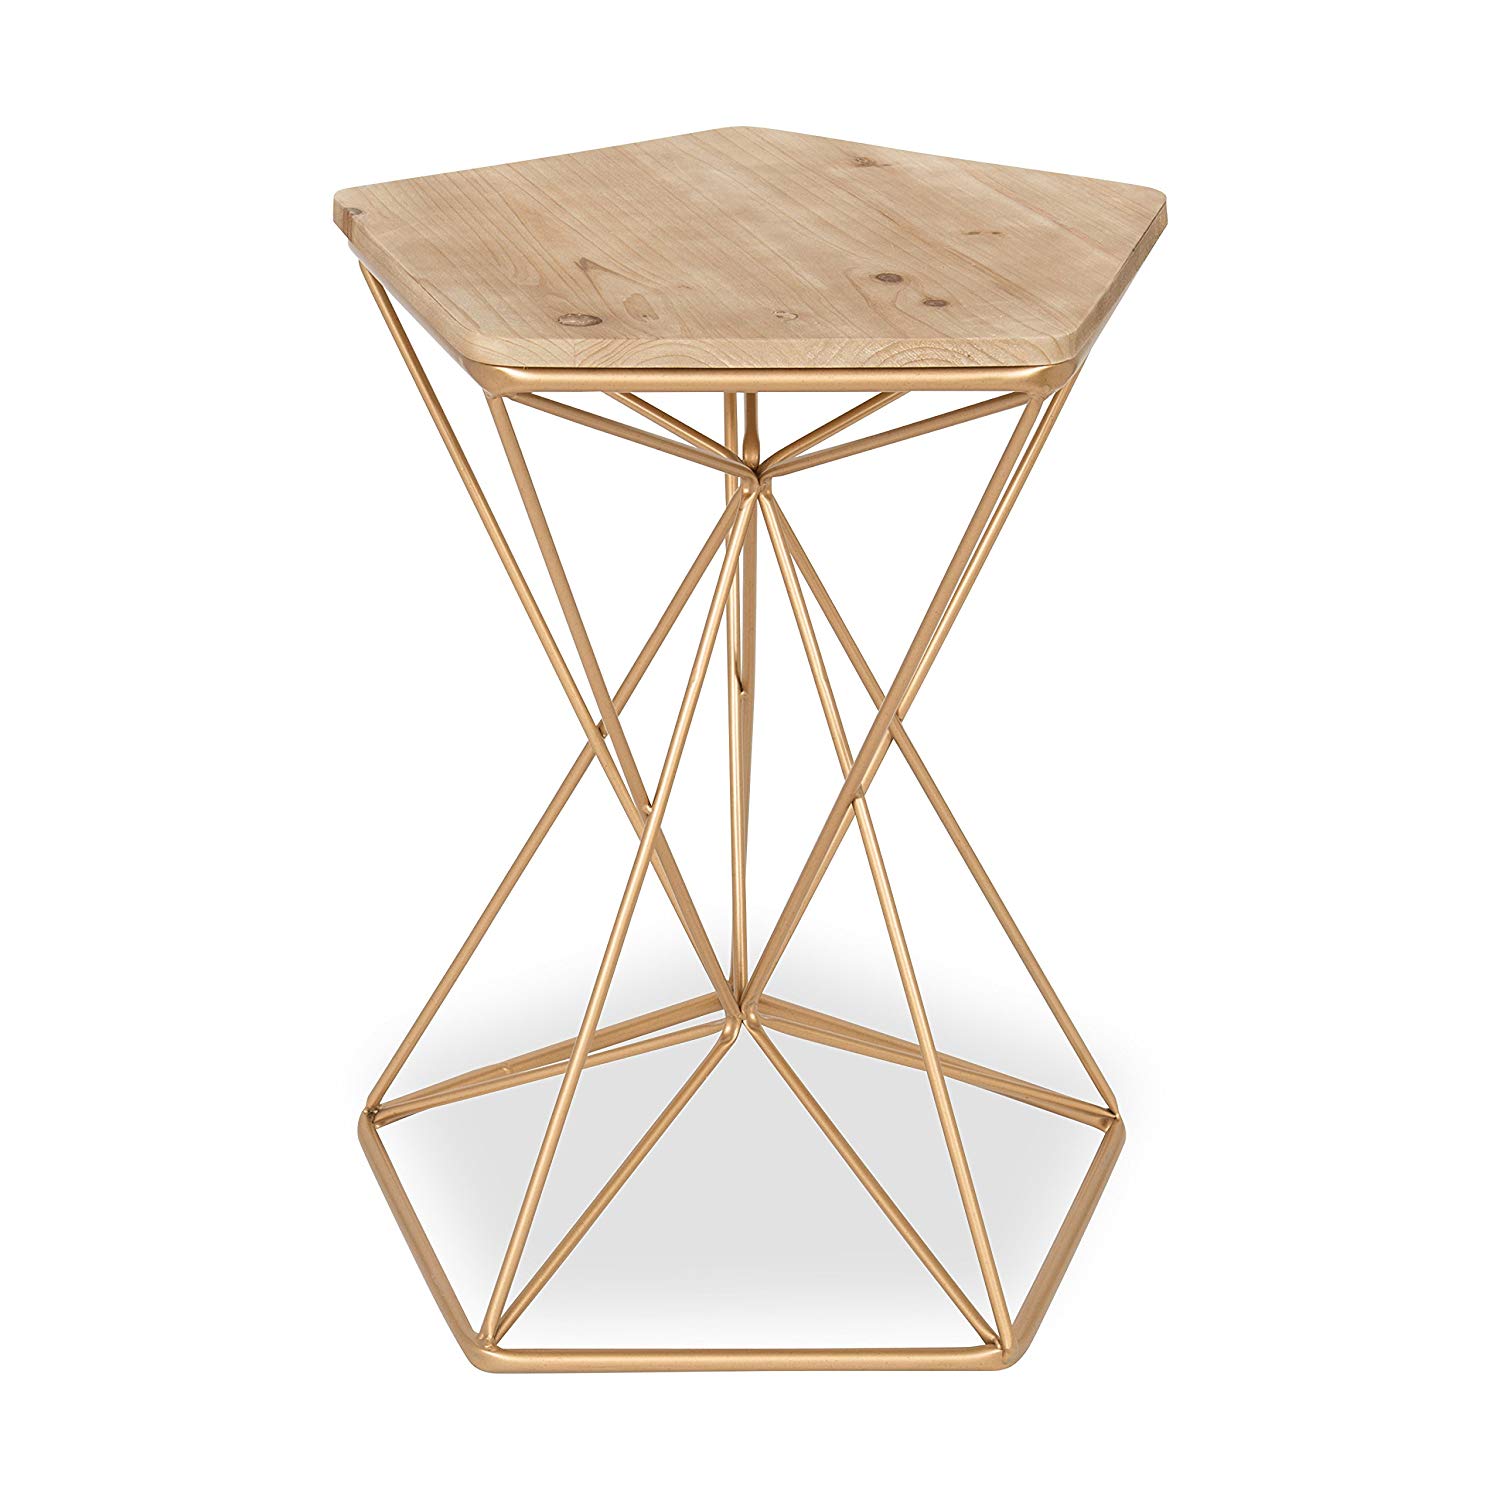 kate and laurel ulane metal side accent table with natural wood top rose gold home kitchen decorative nautical lanterns inch round linen tablecloth dark marble coffee polyester